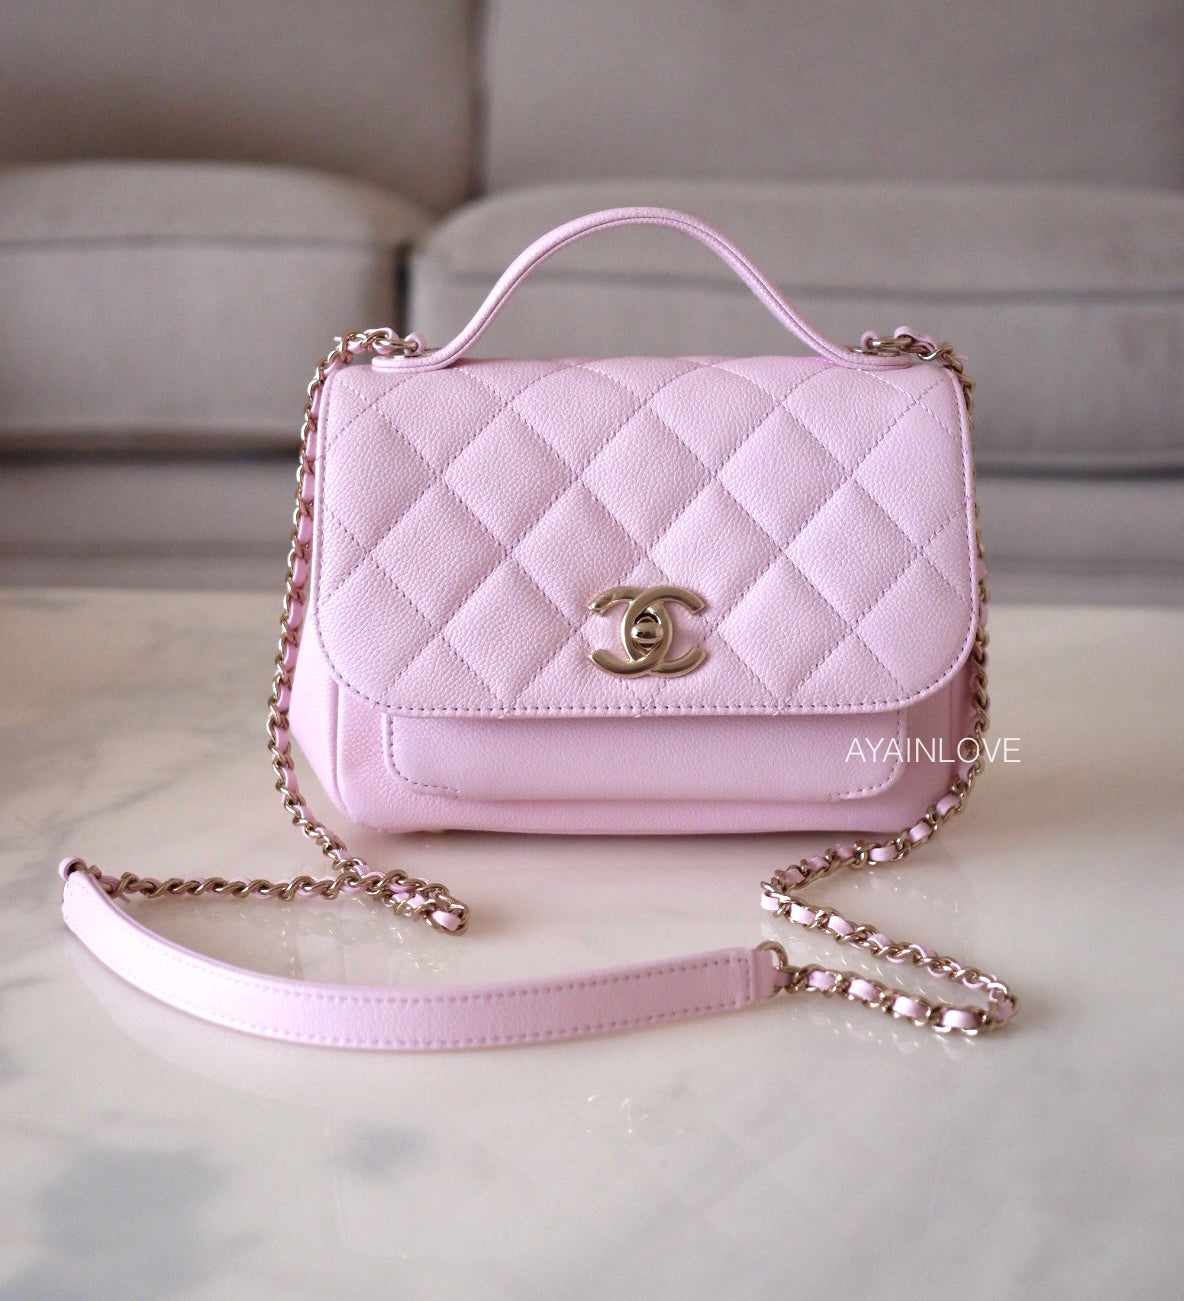 Chanel Blue Small Chic Pearls Flap Bag